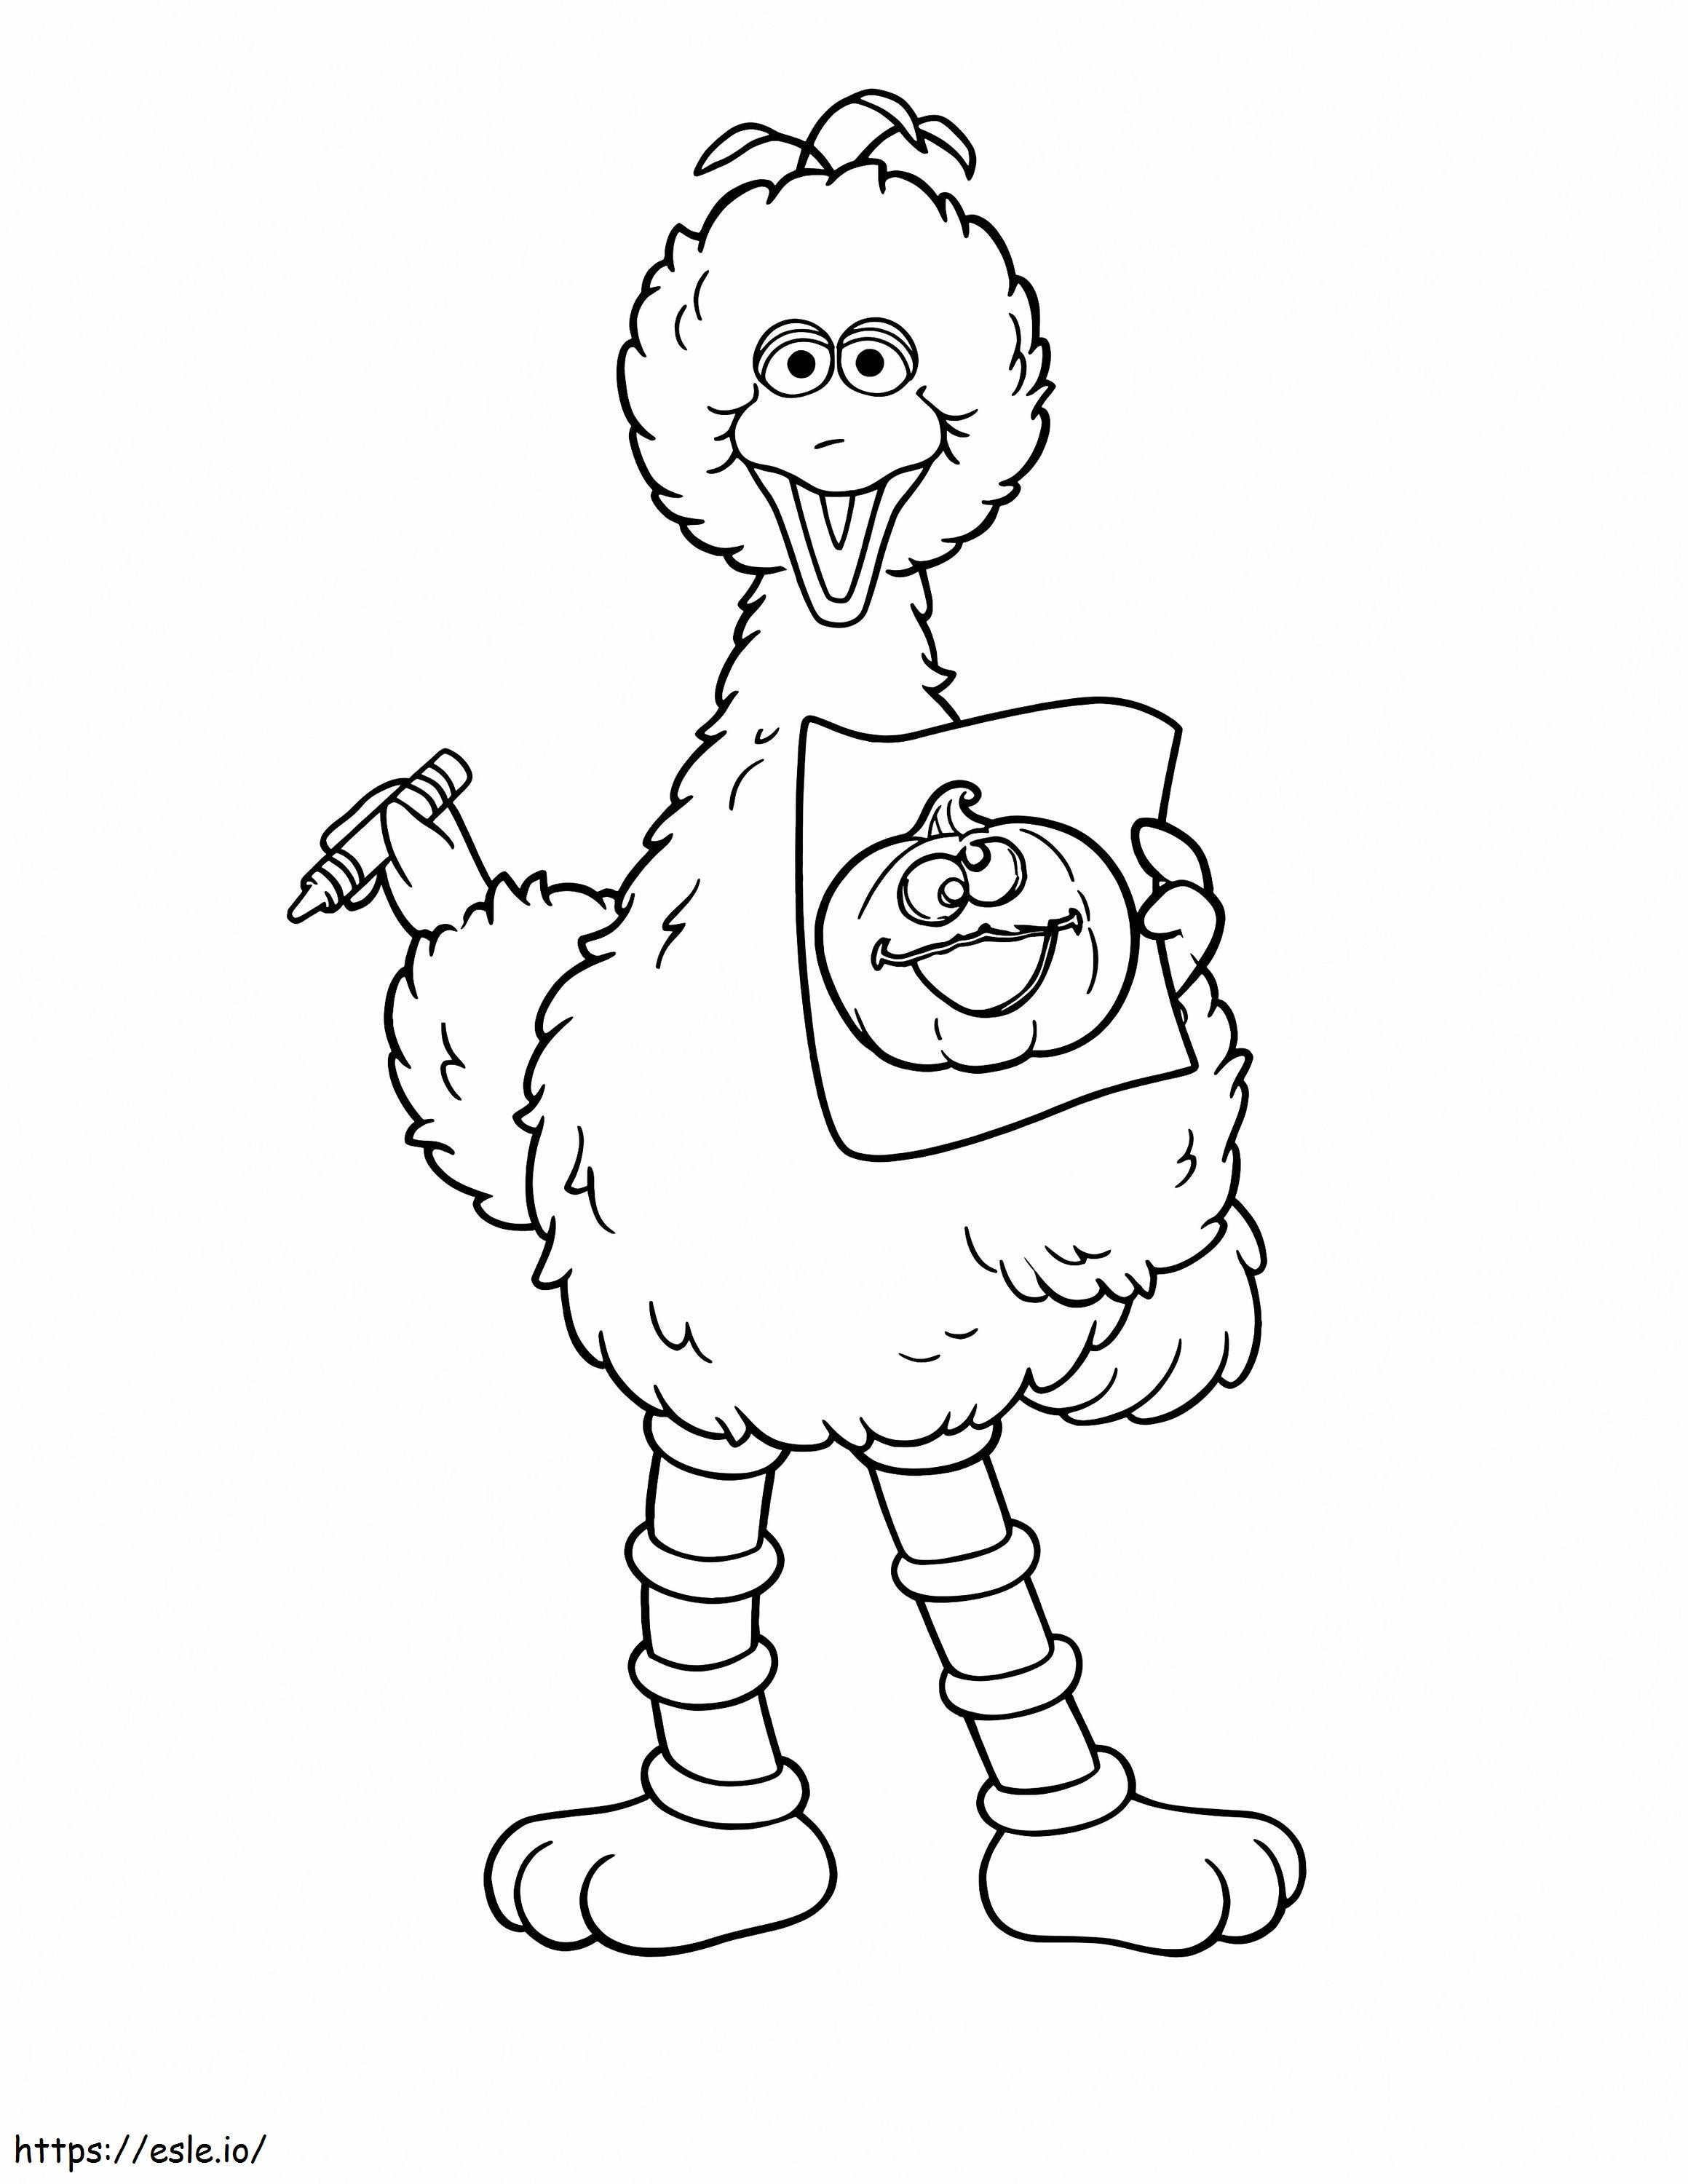 1582166572 Drawing Sesame Street 101 coloring page